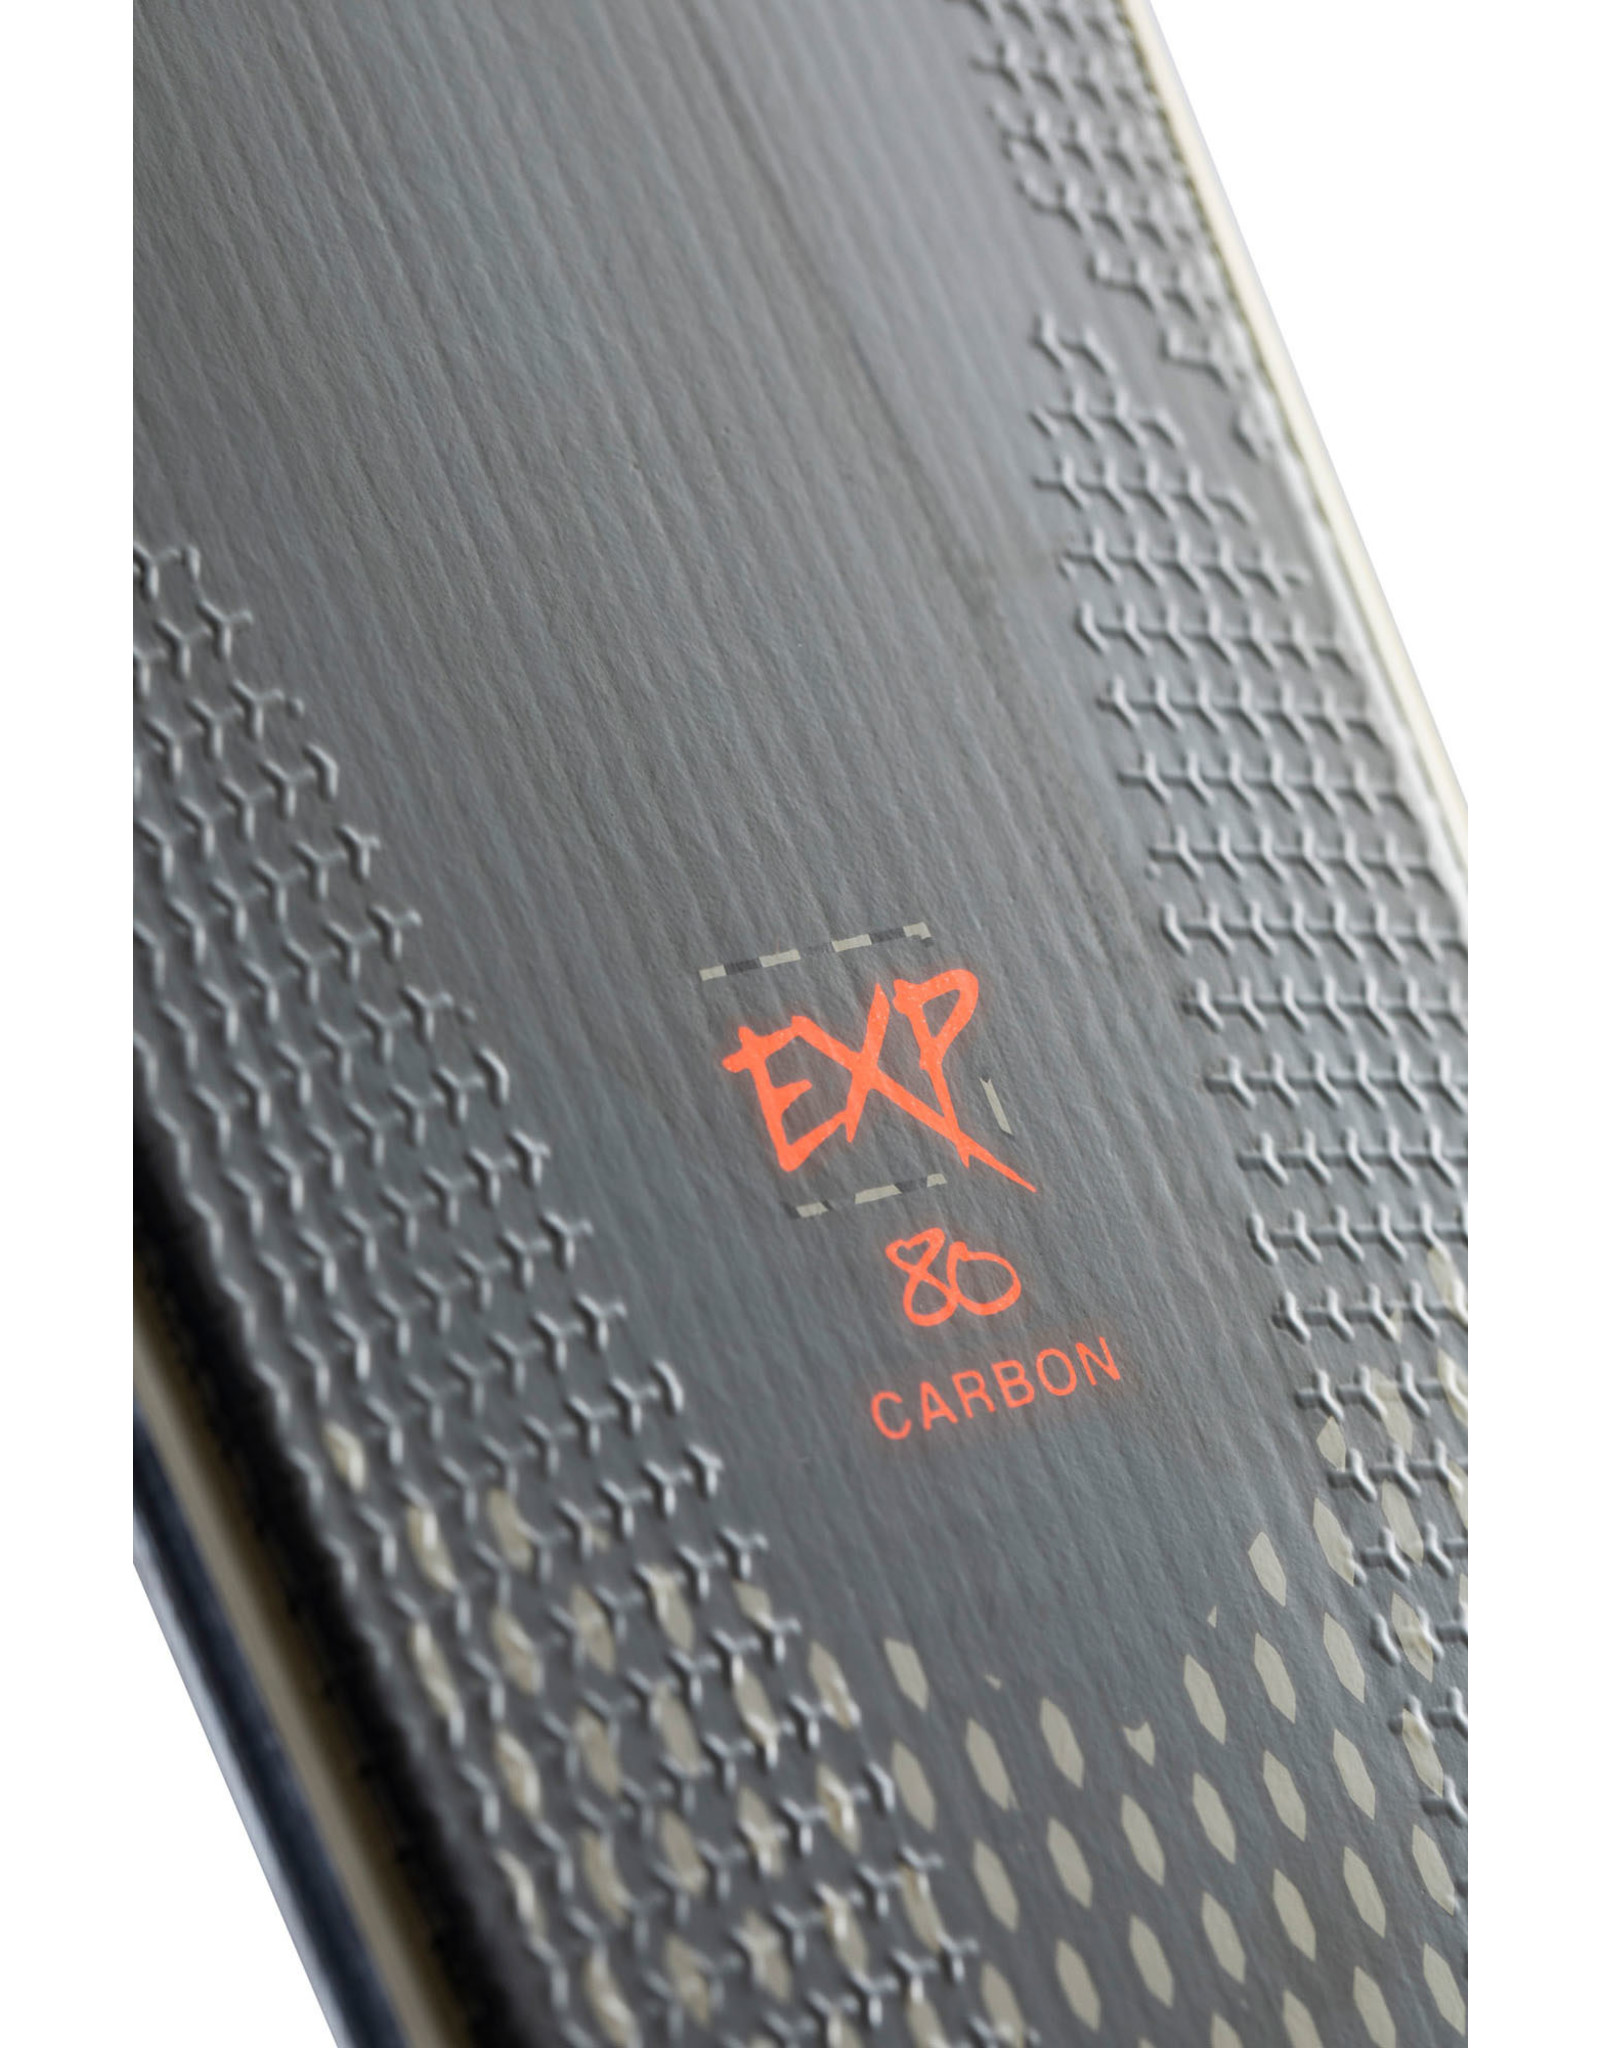 Rossignol EXPERIENCE 80 CARBON XPRESS XP11